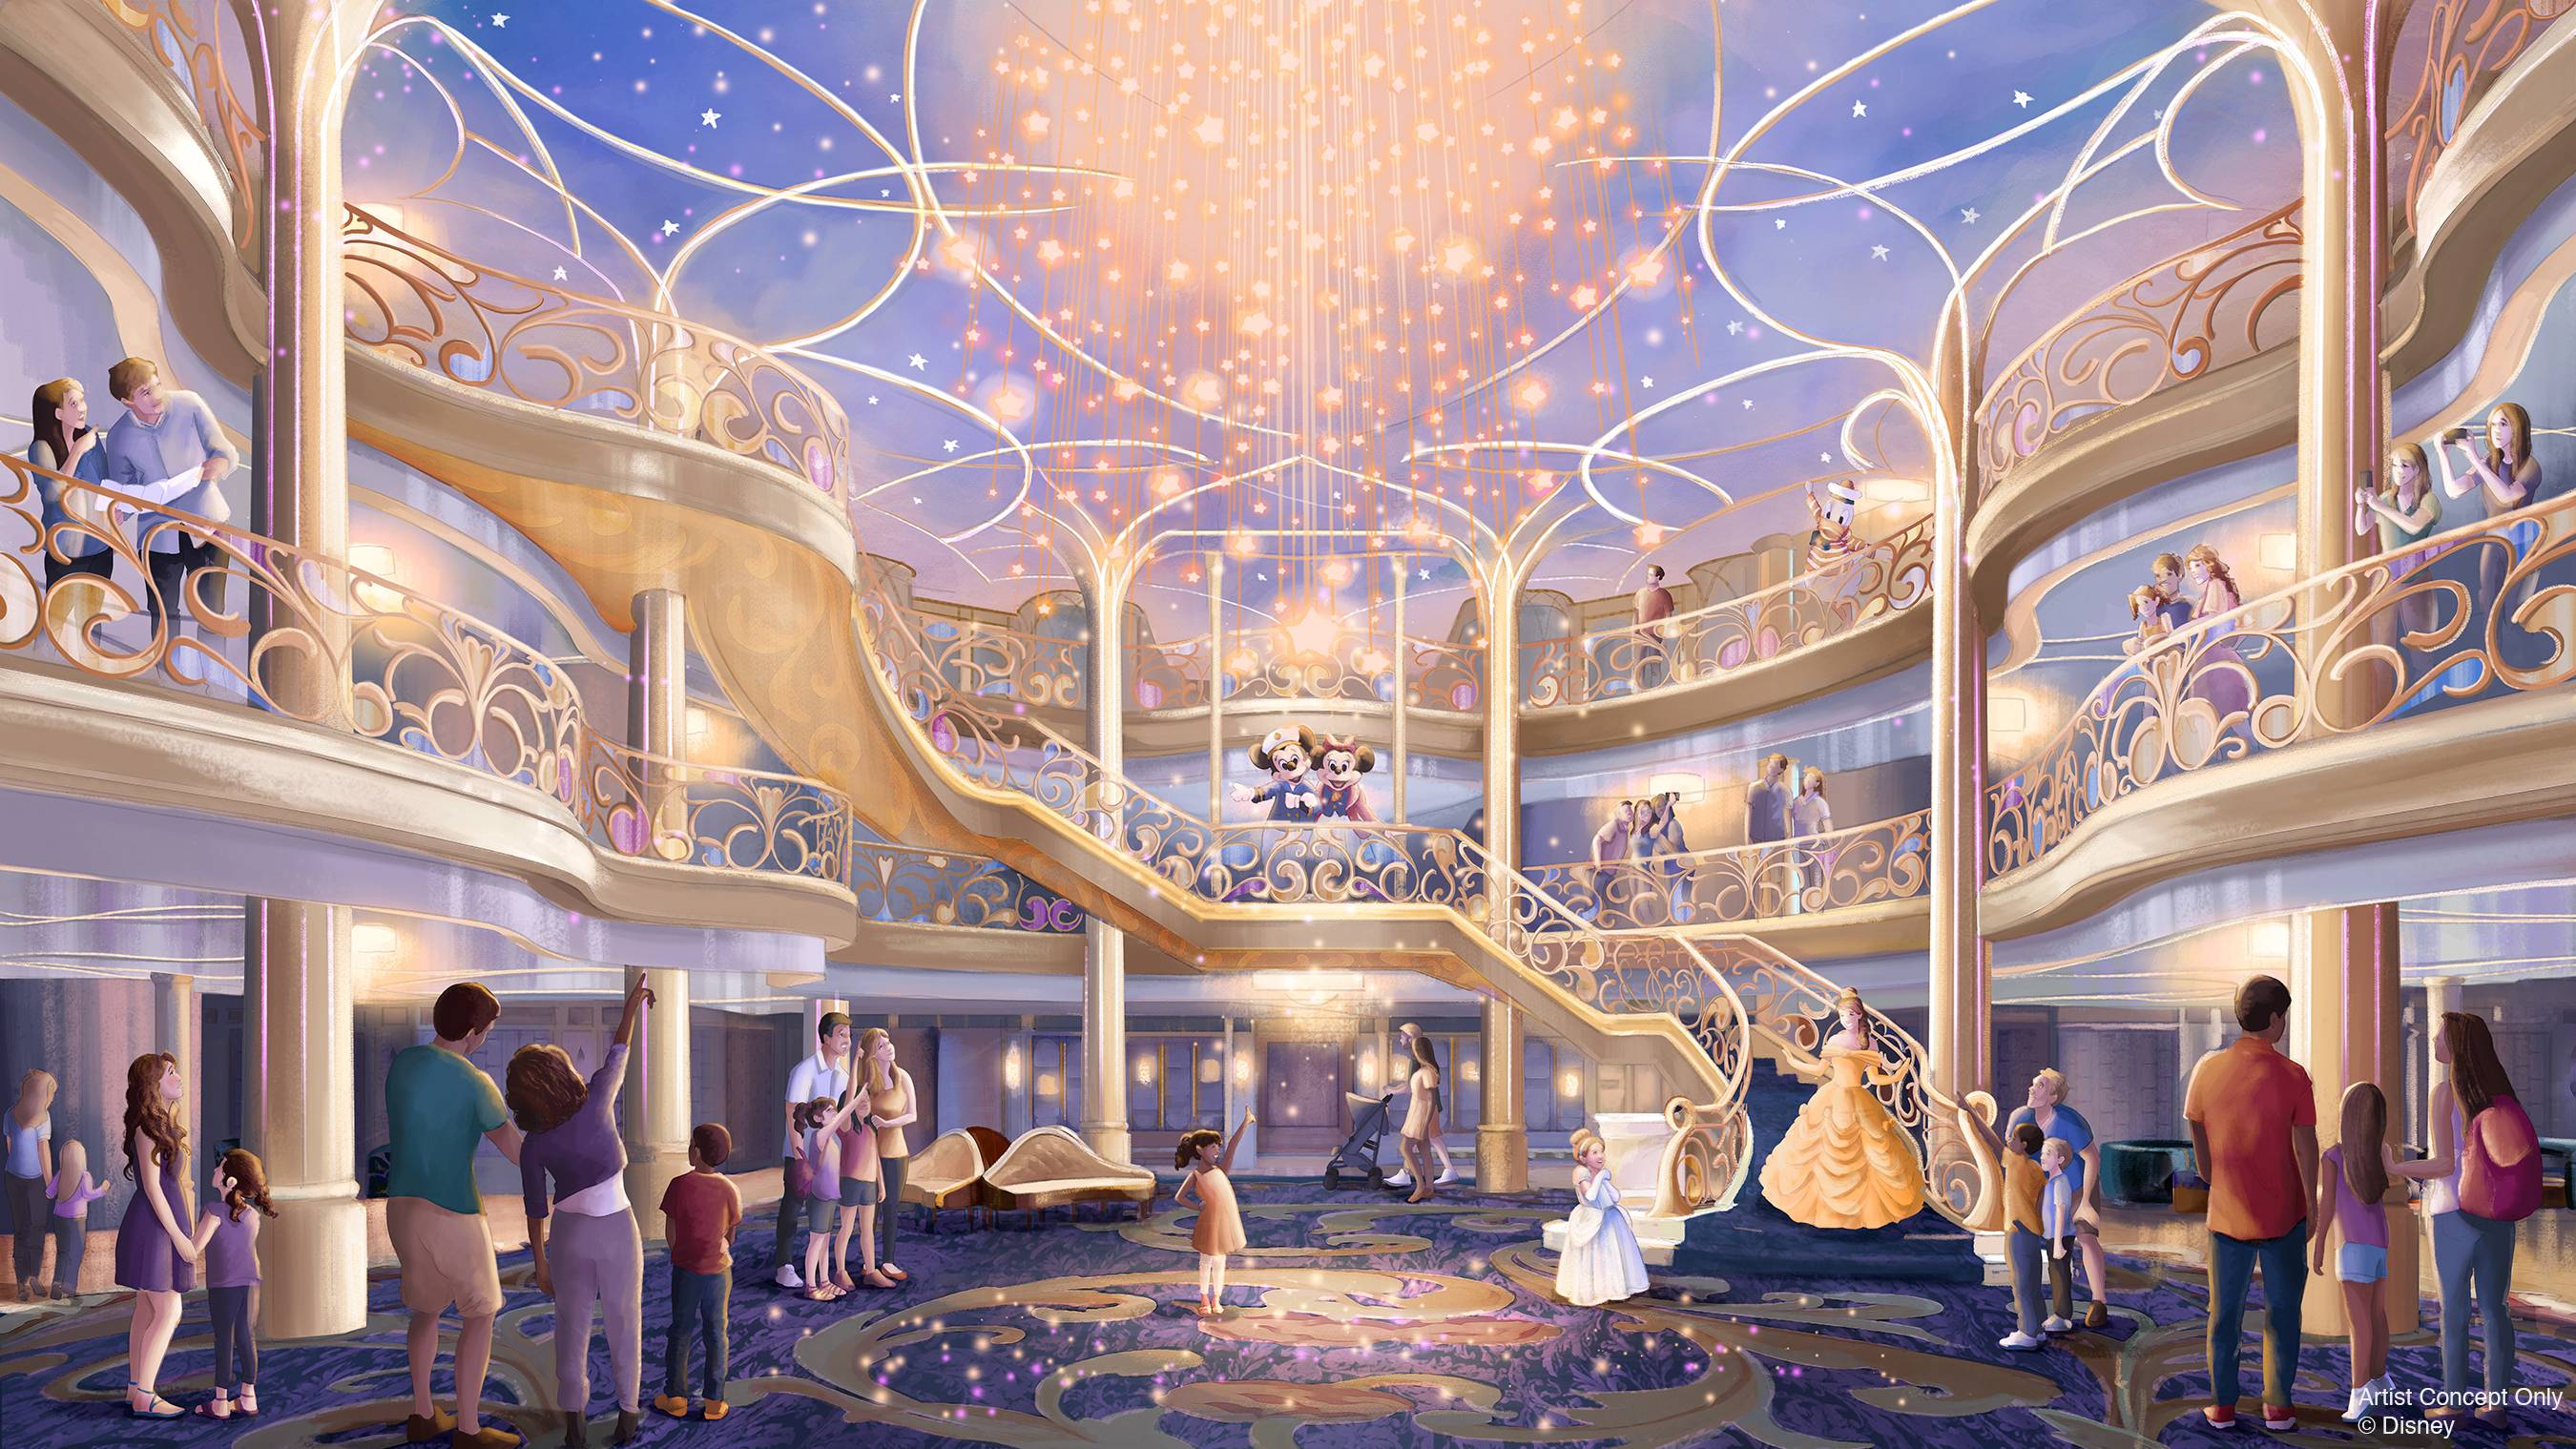 SPECIAL EVENT - First look at the Disney Wish as Disney Cruise Line unveils its newest ship